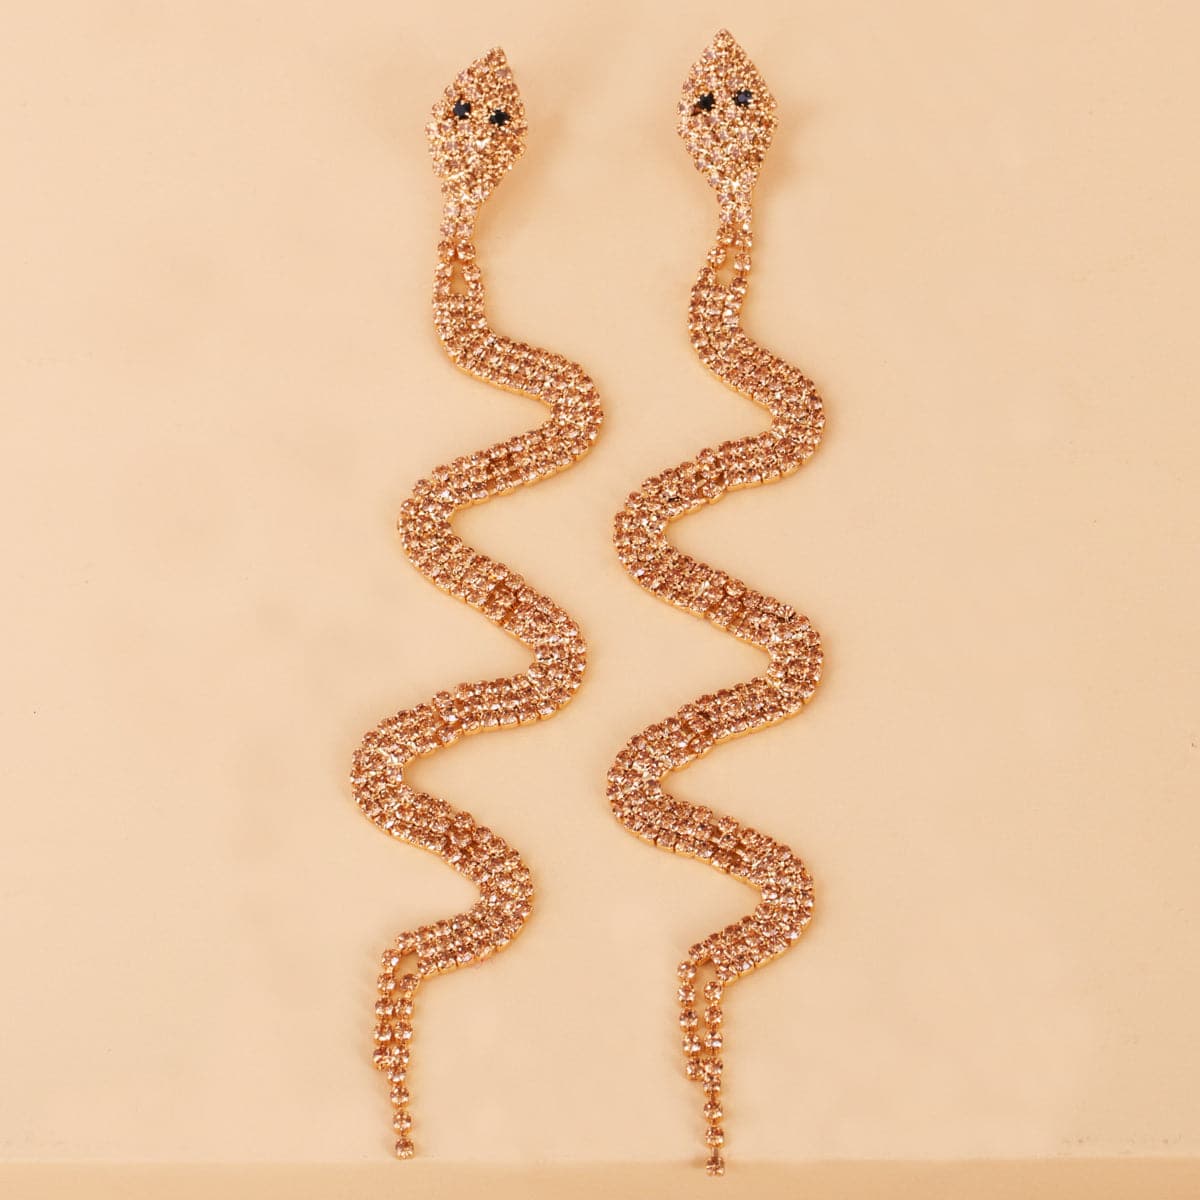 Champagne Cubic Zirconia & 18K Gold-Plated Snake Drop Earrings